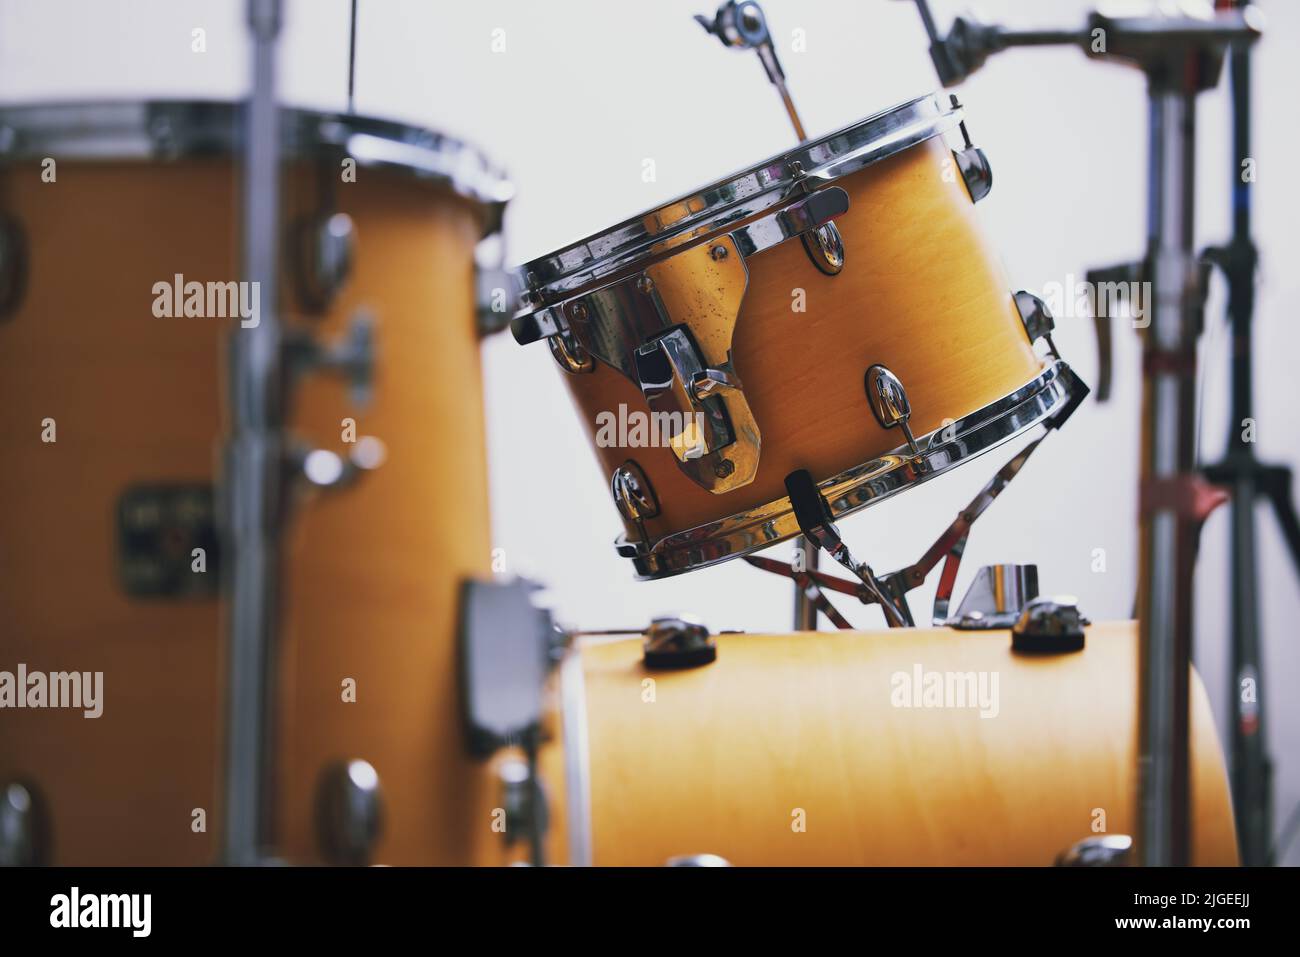 Life would be dull without music. a drum set in an empty studio during the day. Stock Photo